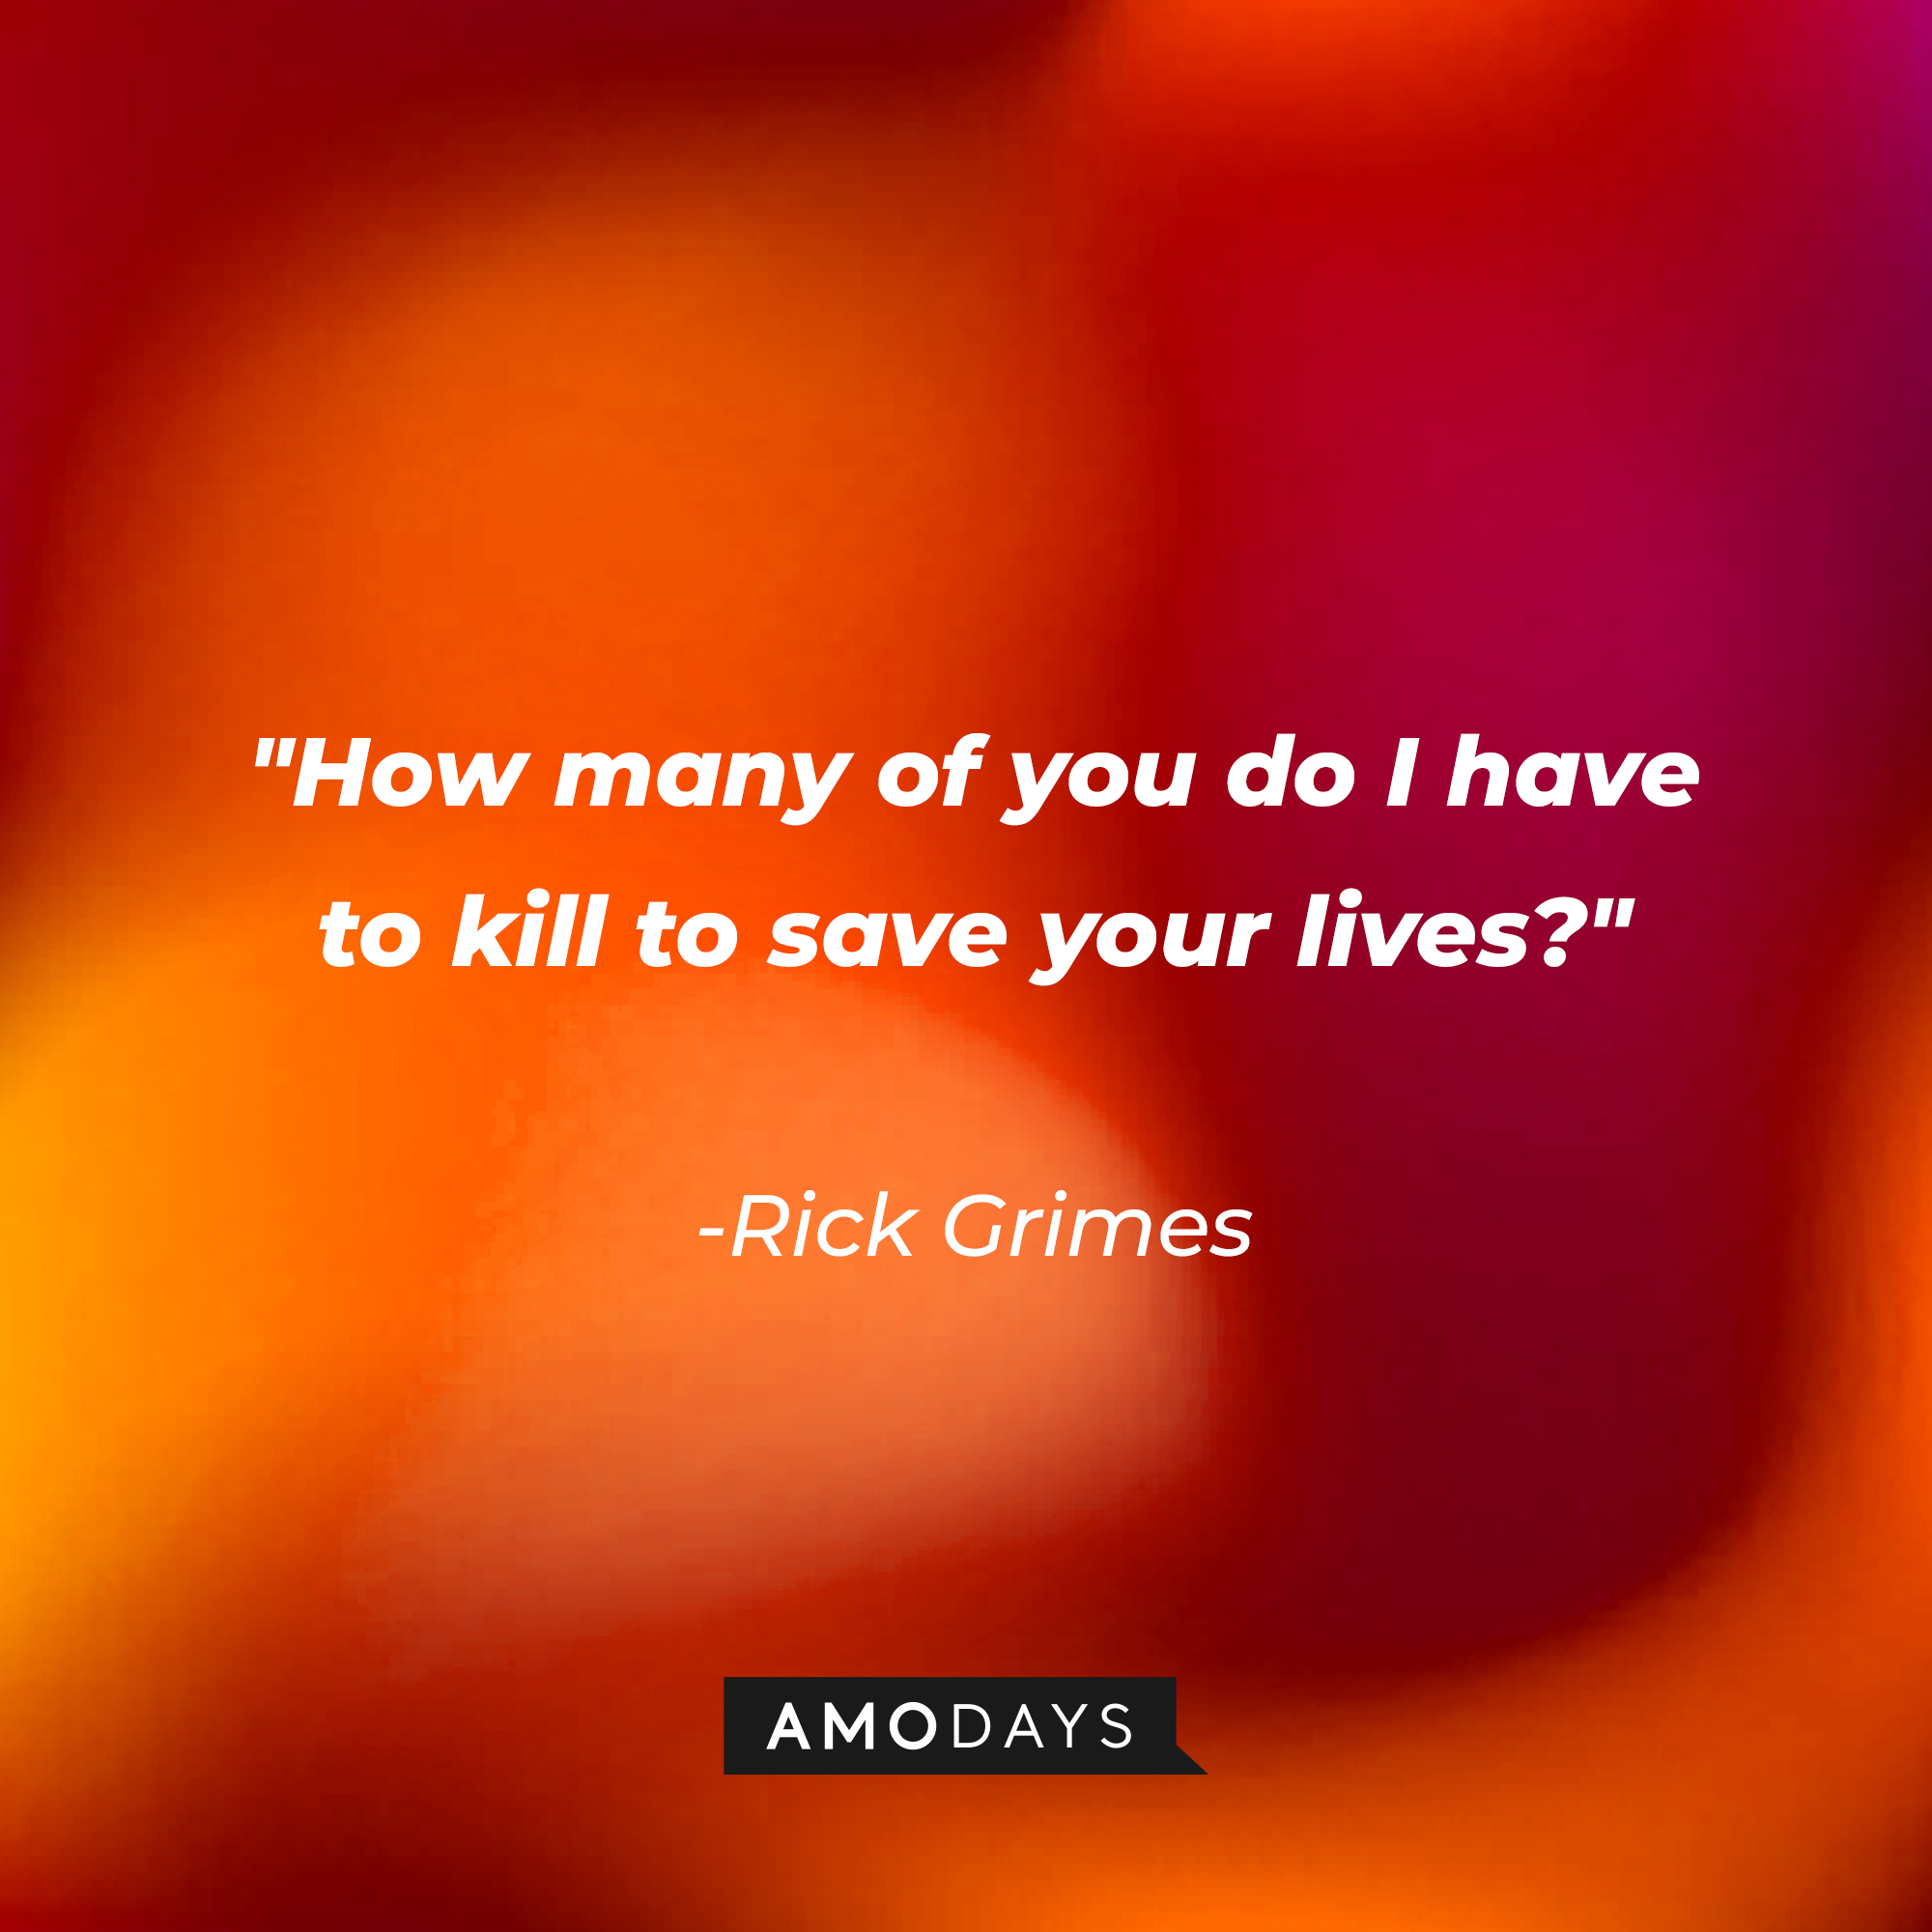 Rick Grimes' quote: "How many of you do I have to kill to save your lives?" | Source: AmoDays